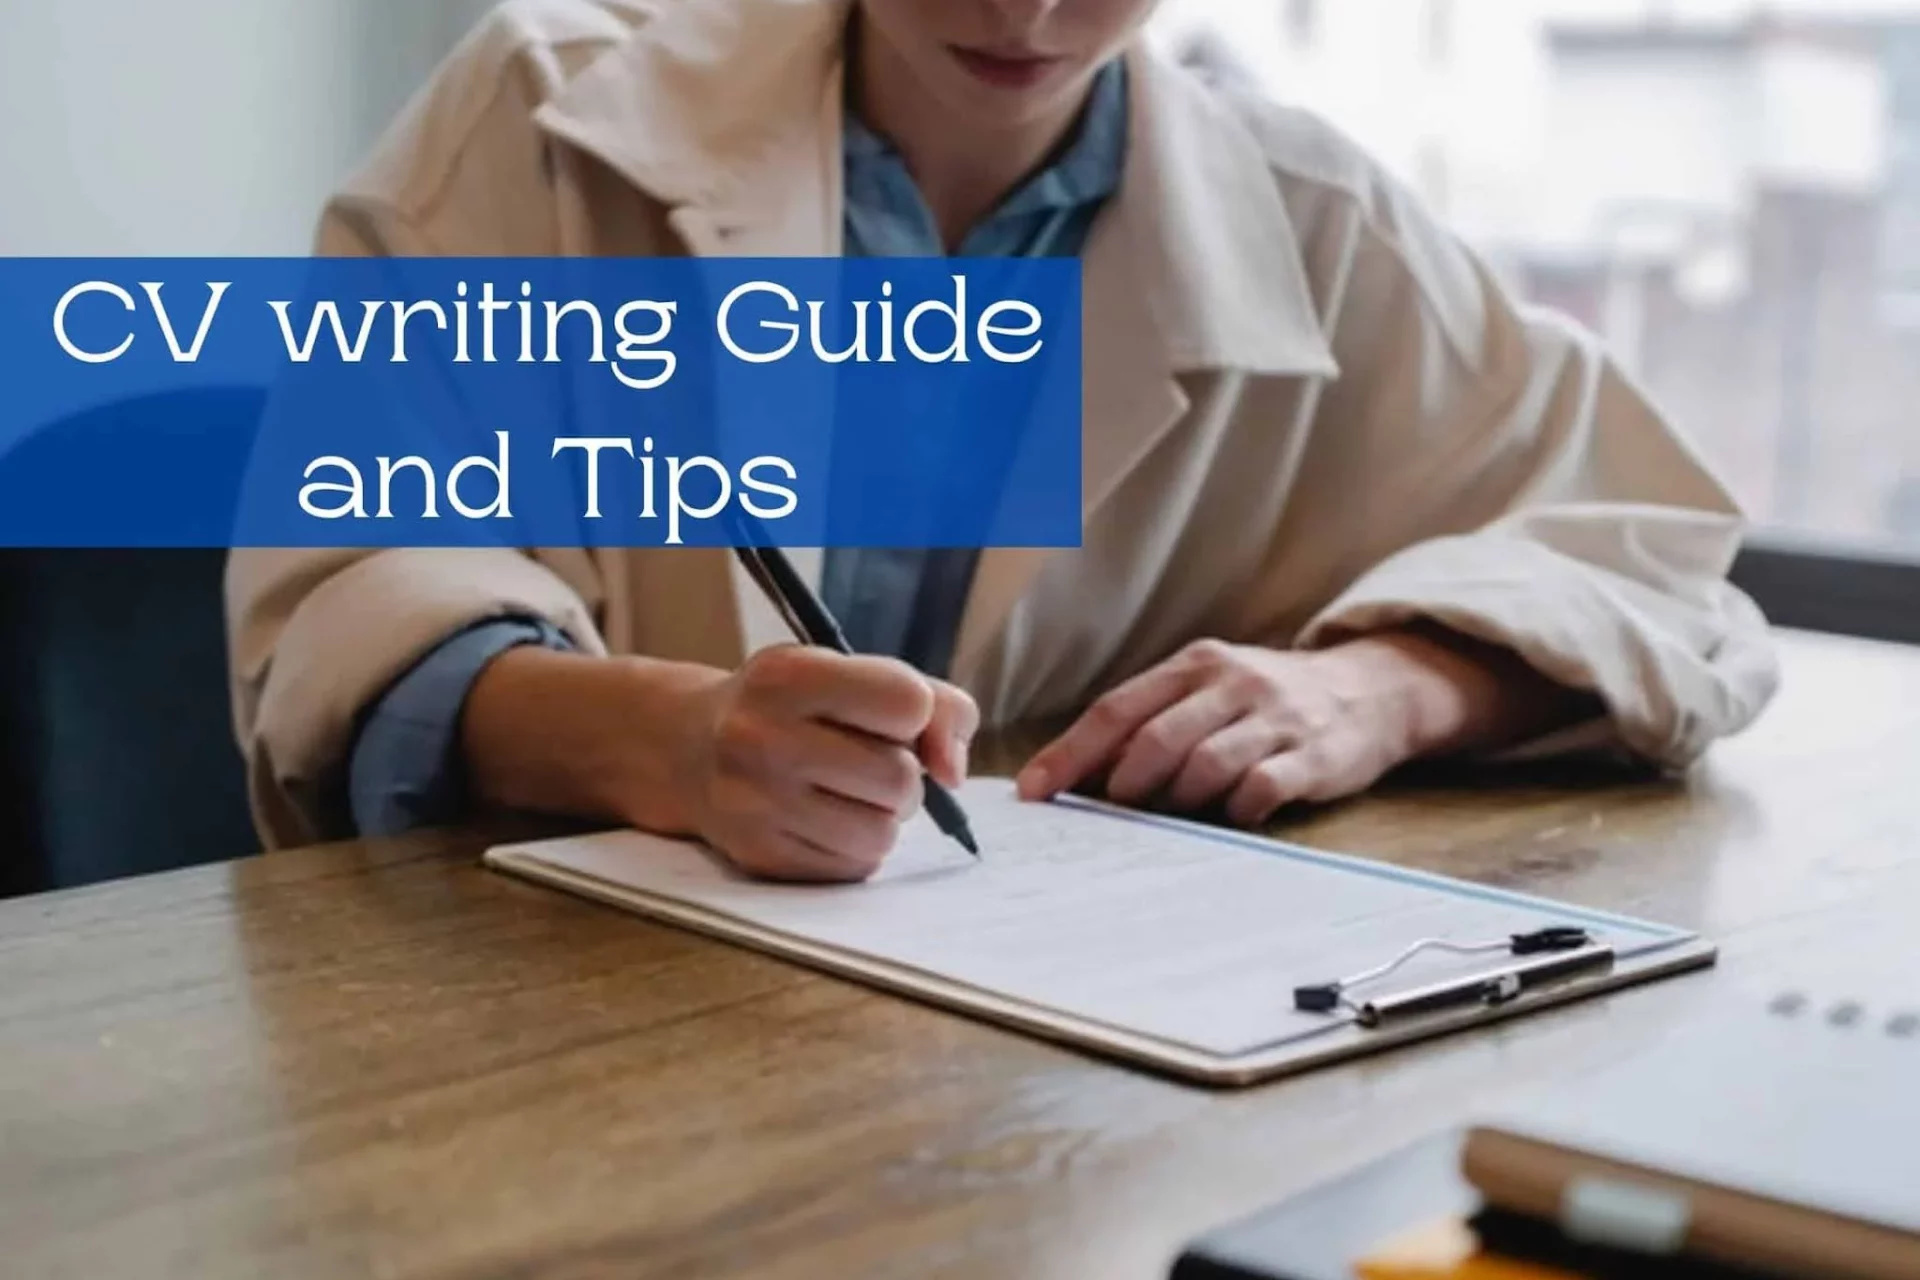 Curriculum Vitae writing Guide and Tips : Advice from Pro